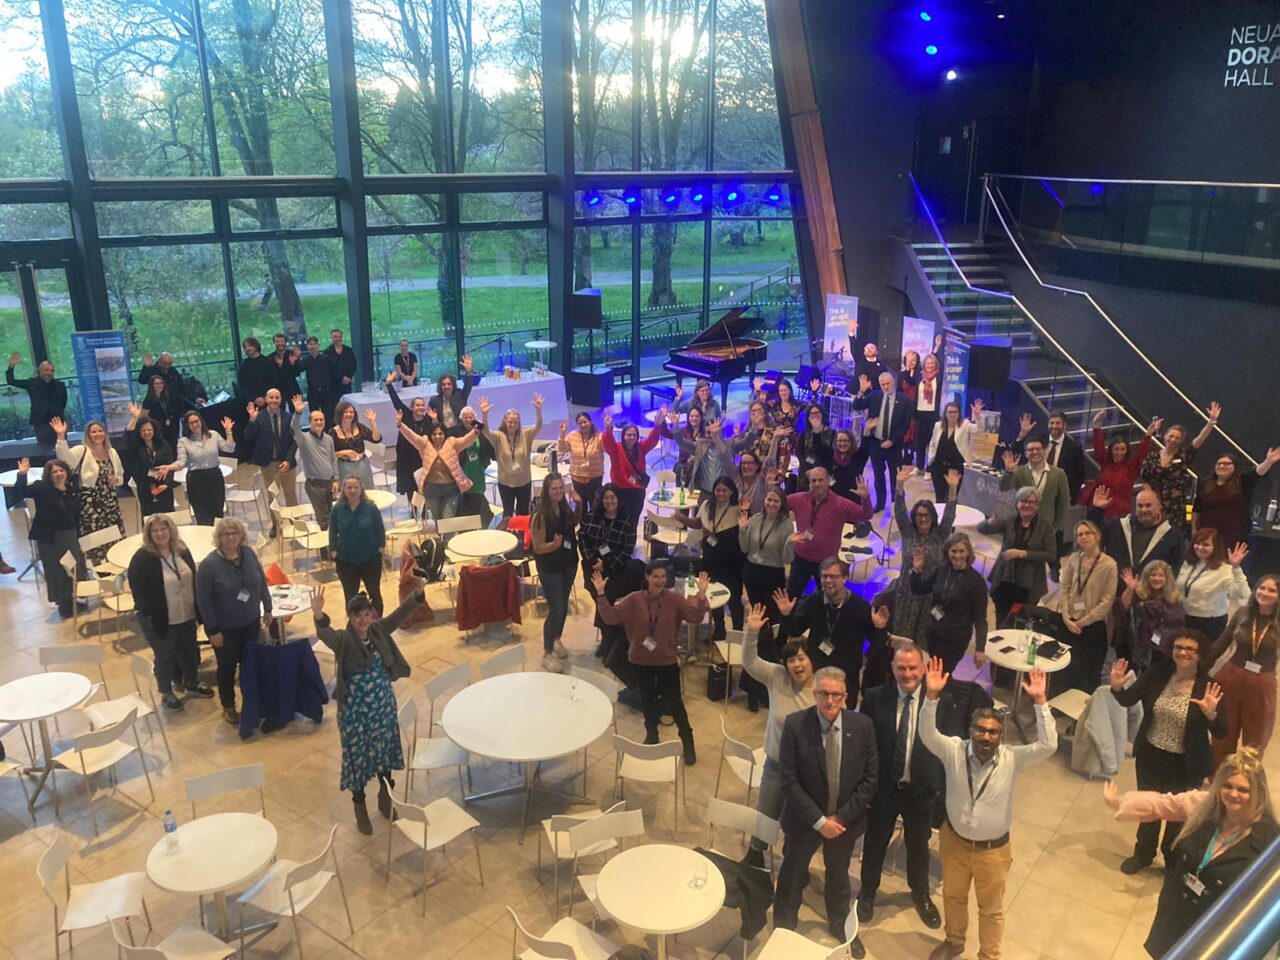 Birds eye view of a conference with a crowd of people looking up and waving. There are round tables with chairs and banners around the outside. A staircase and window looking out to a wooded area are in the background.